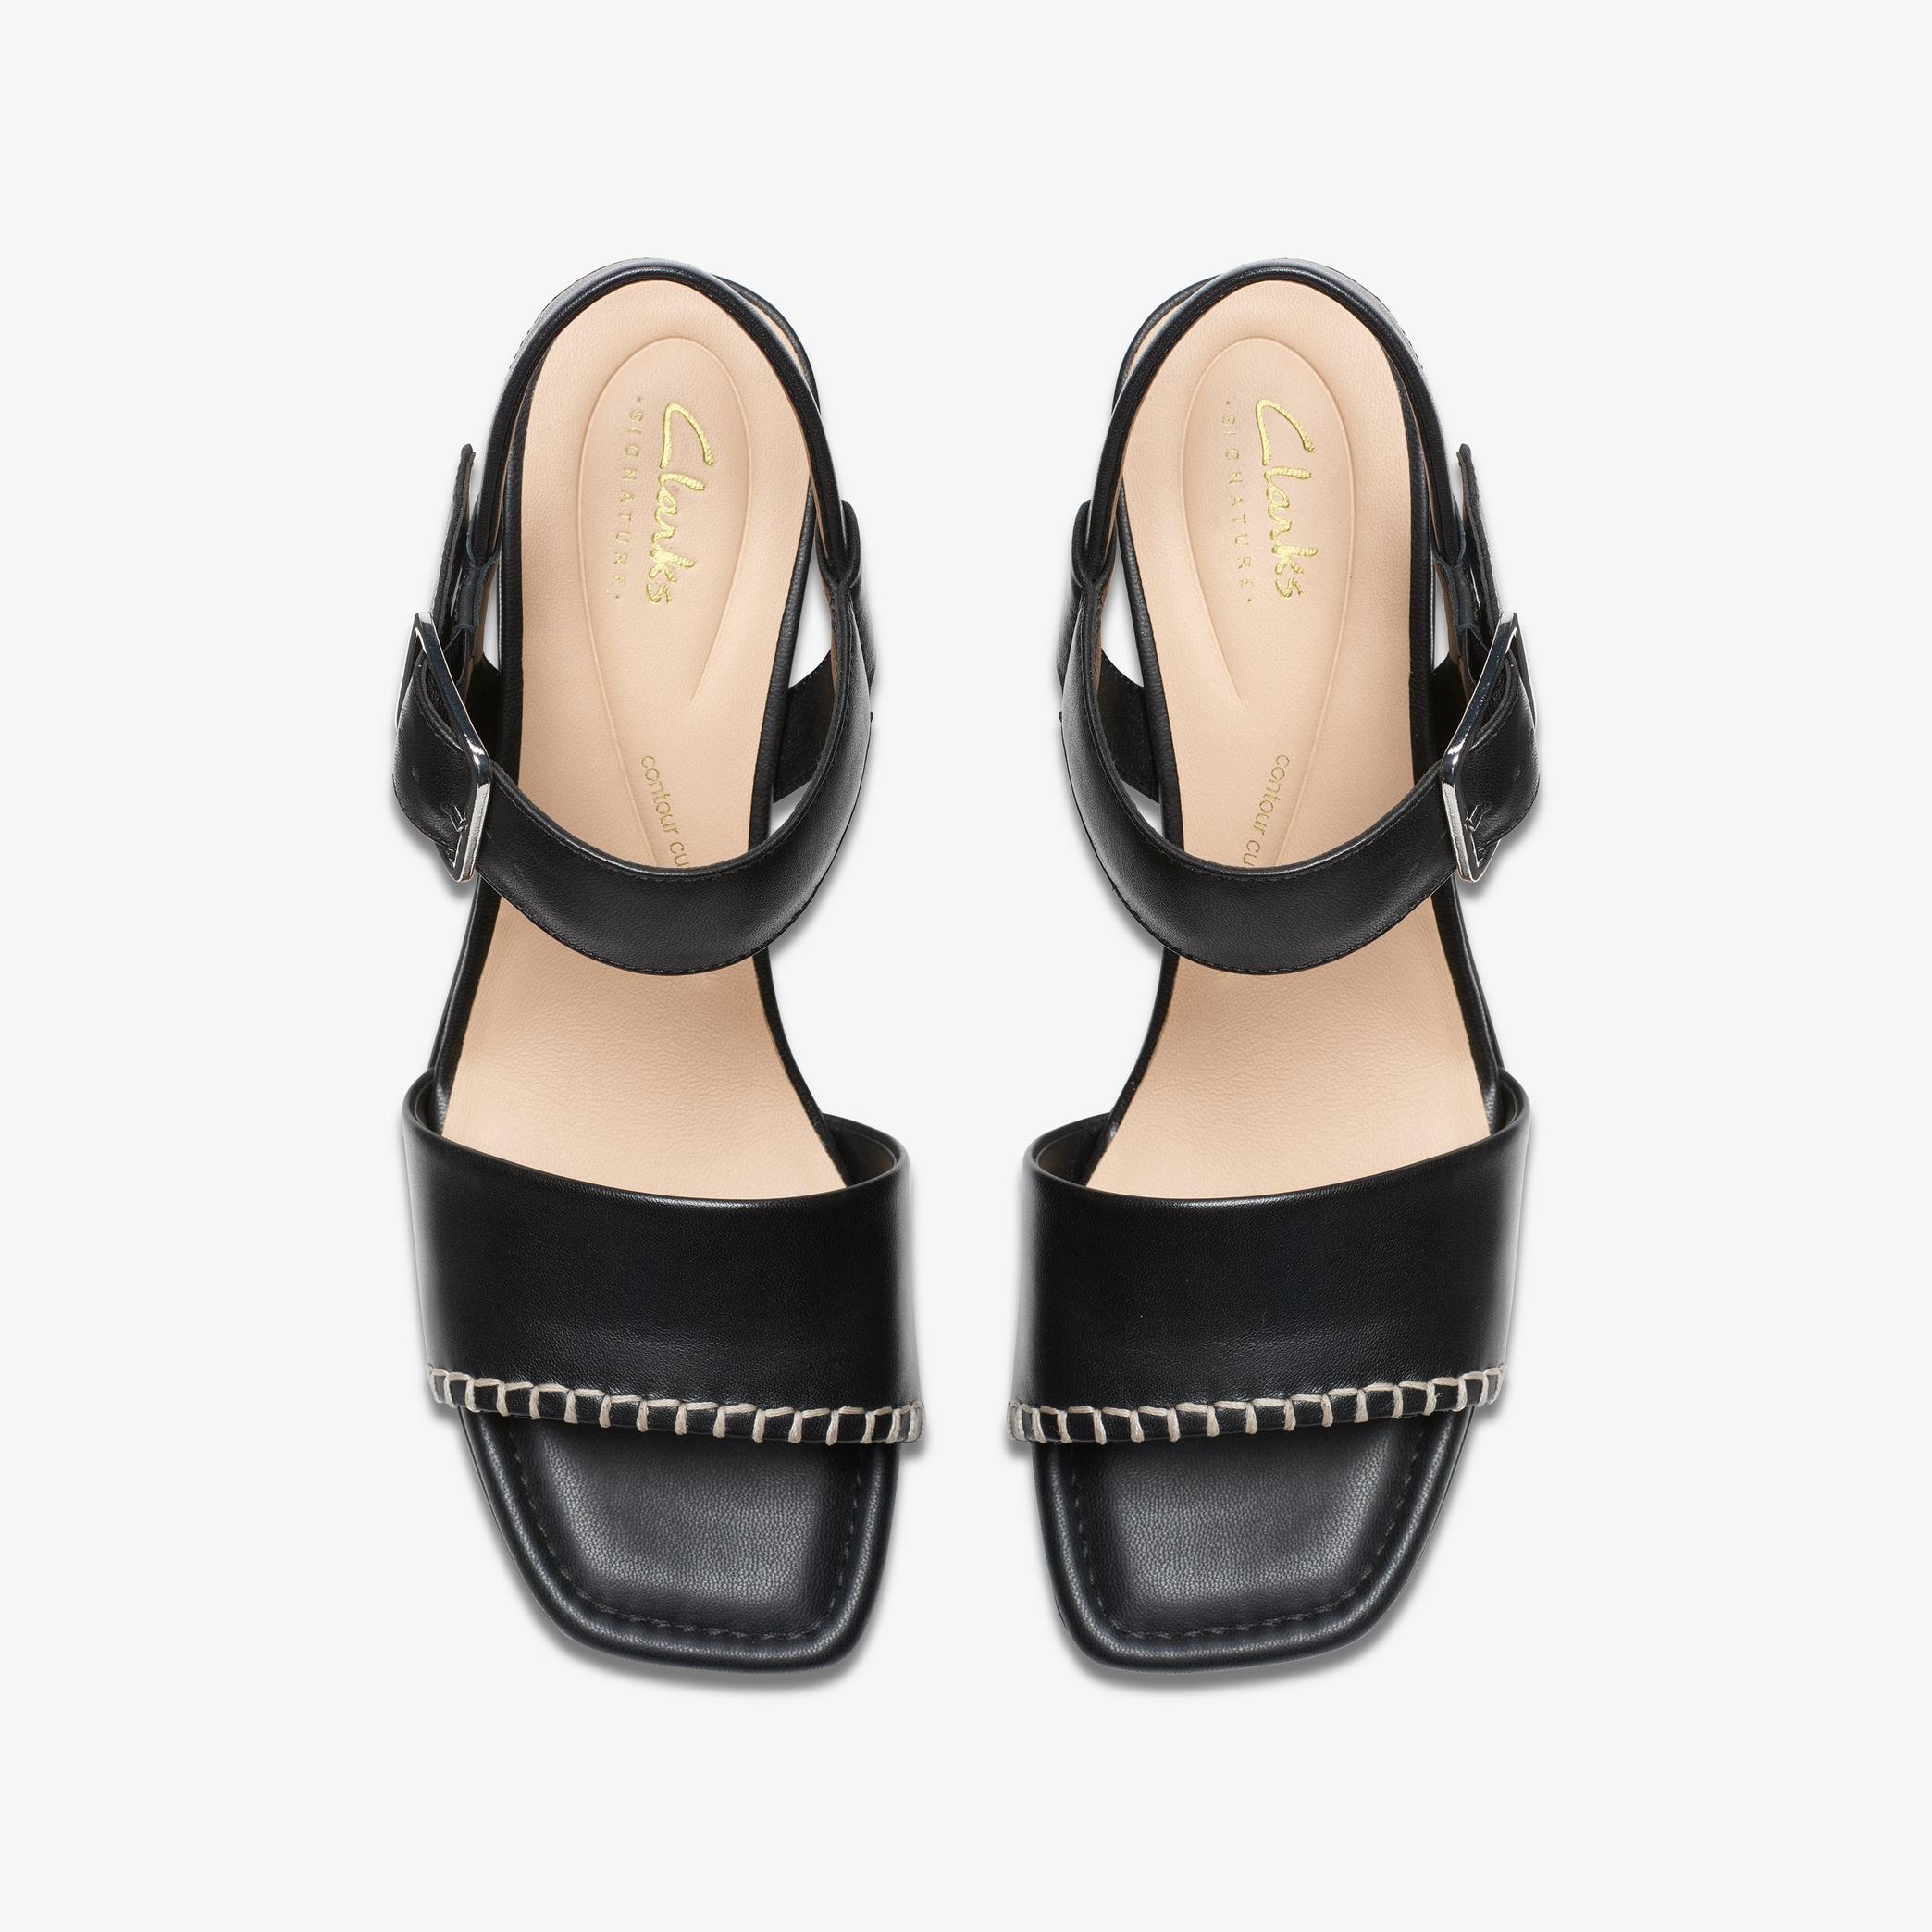 Siara65 Buckle Black Leather Heeled Sandals, view 6 of 6